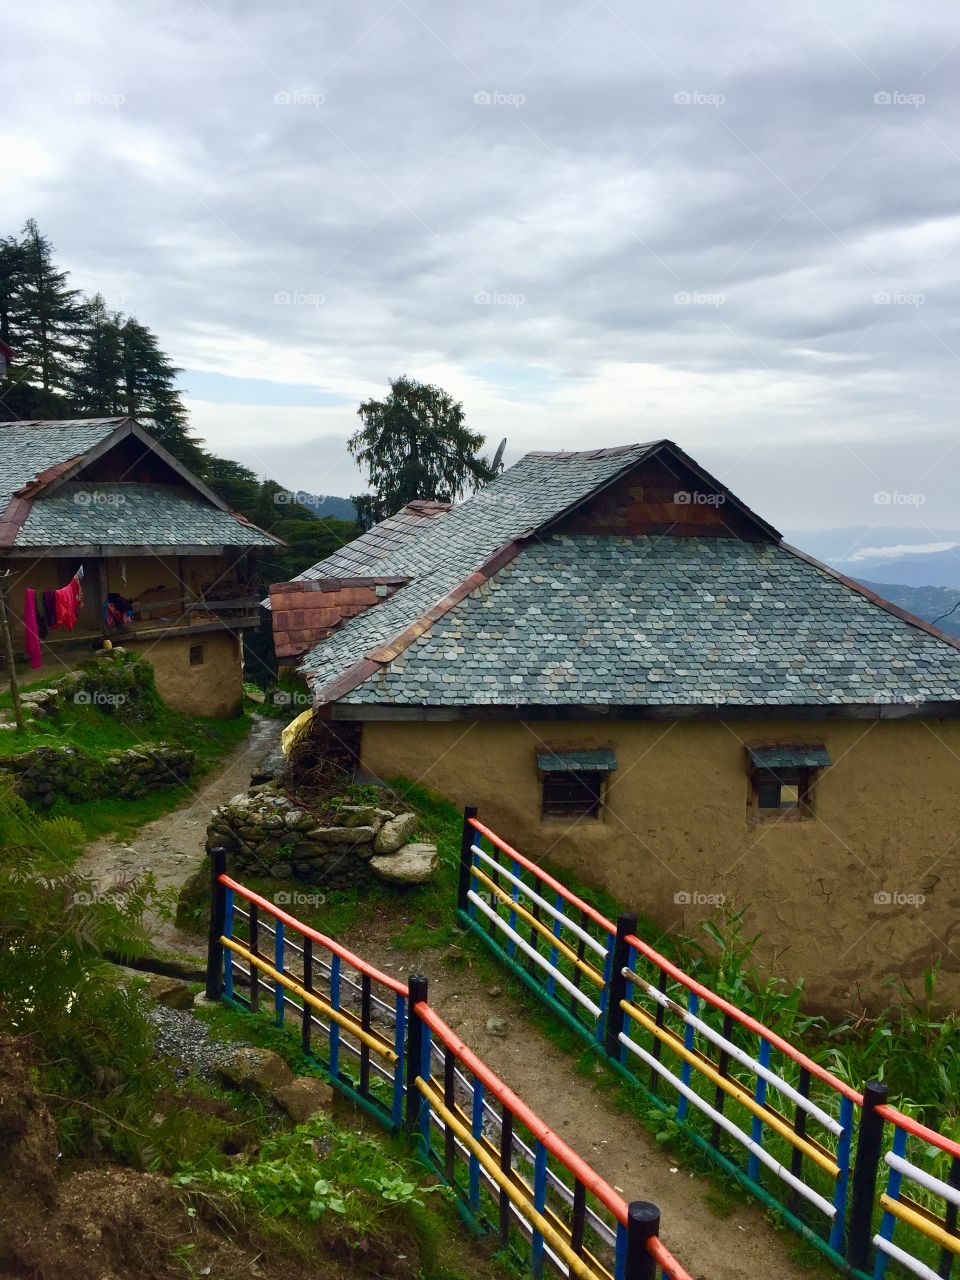 A faraway village, a small hut and mountains all around. You and me living peacefully. Sounds like a good idea?